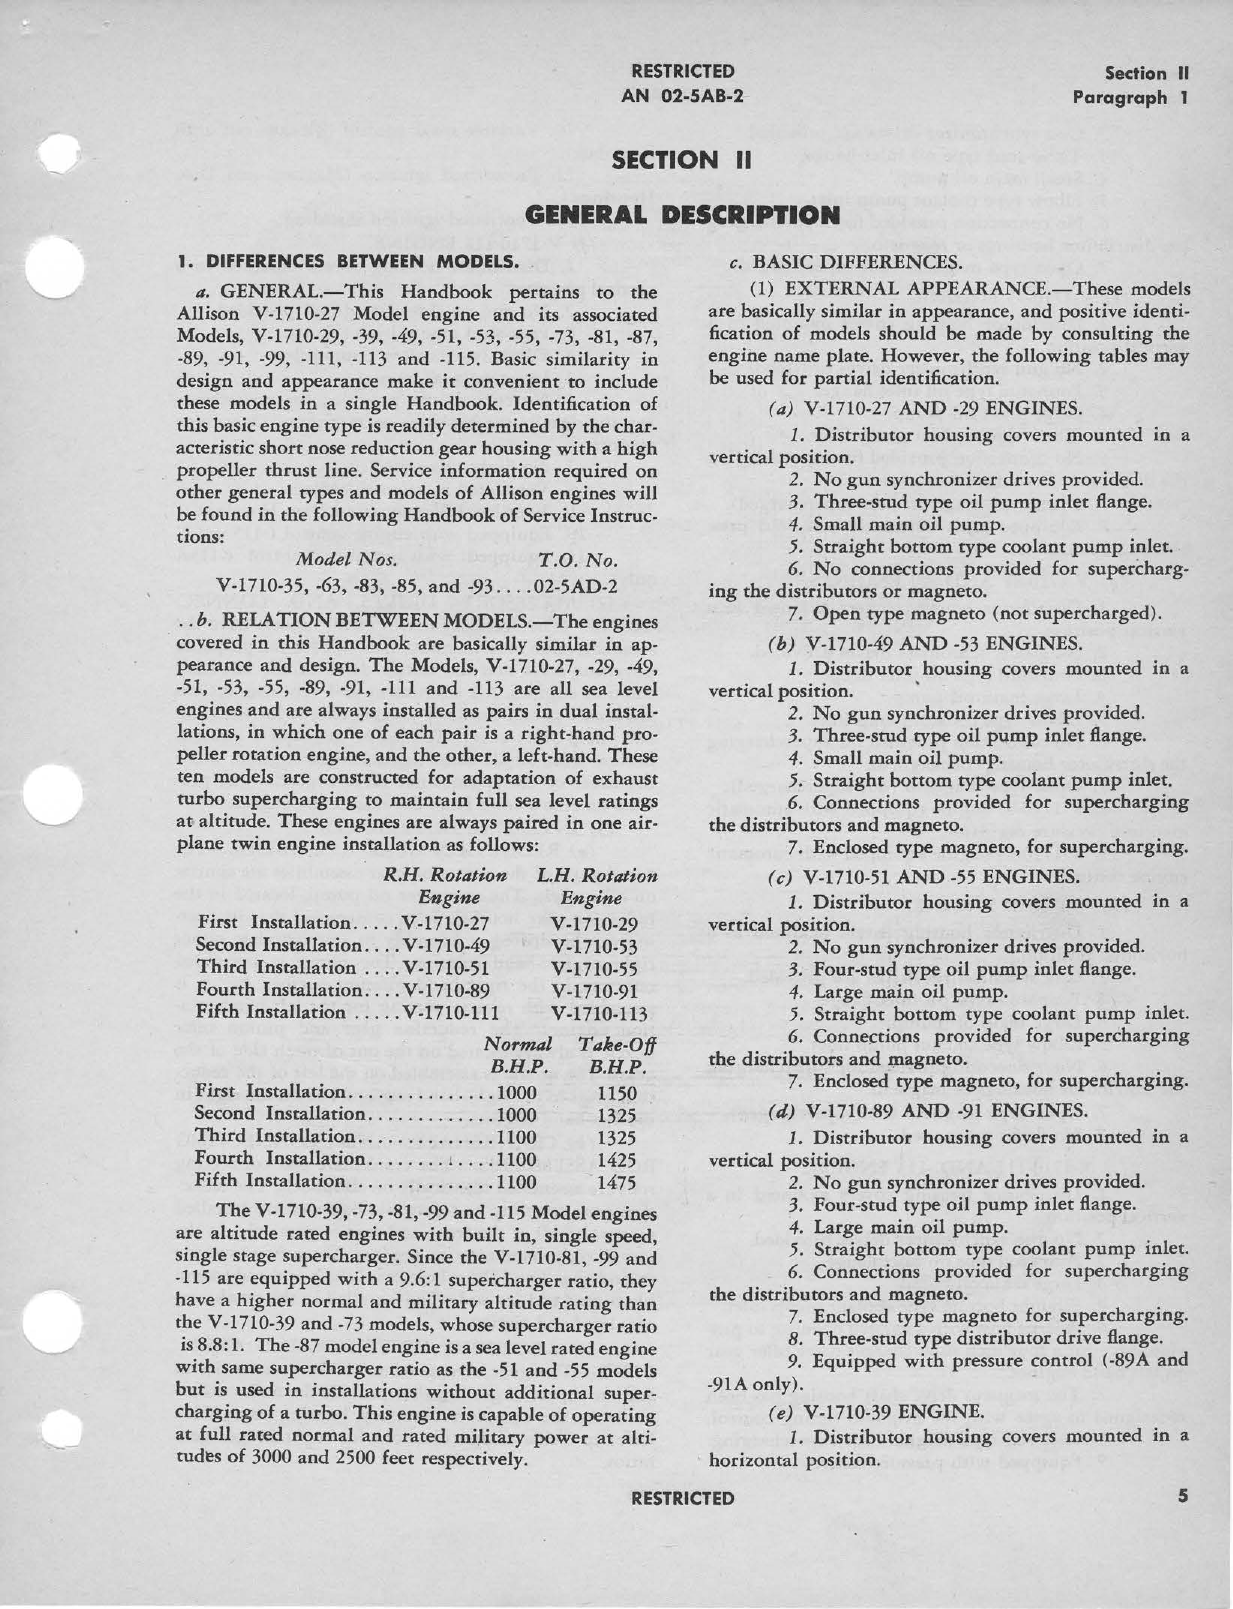 Sample page 9 from AirCorps Library document: Service Instructions for V-1710 Series Engines